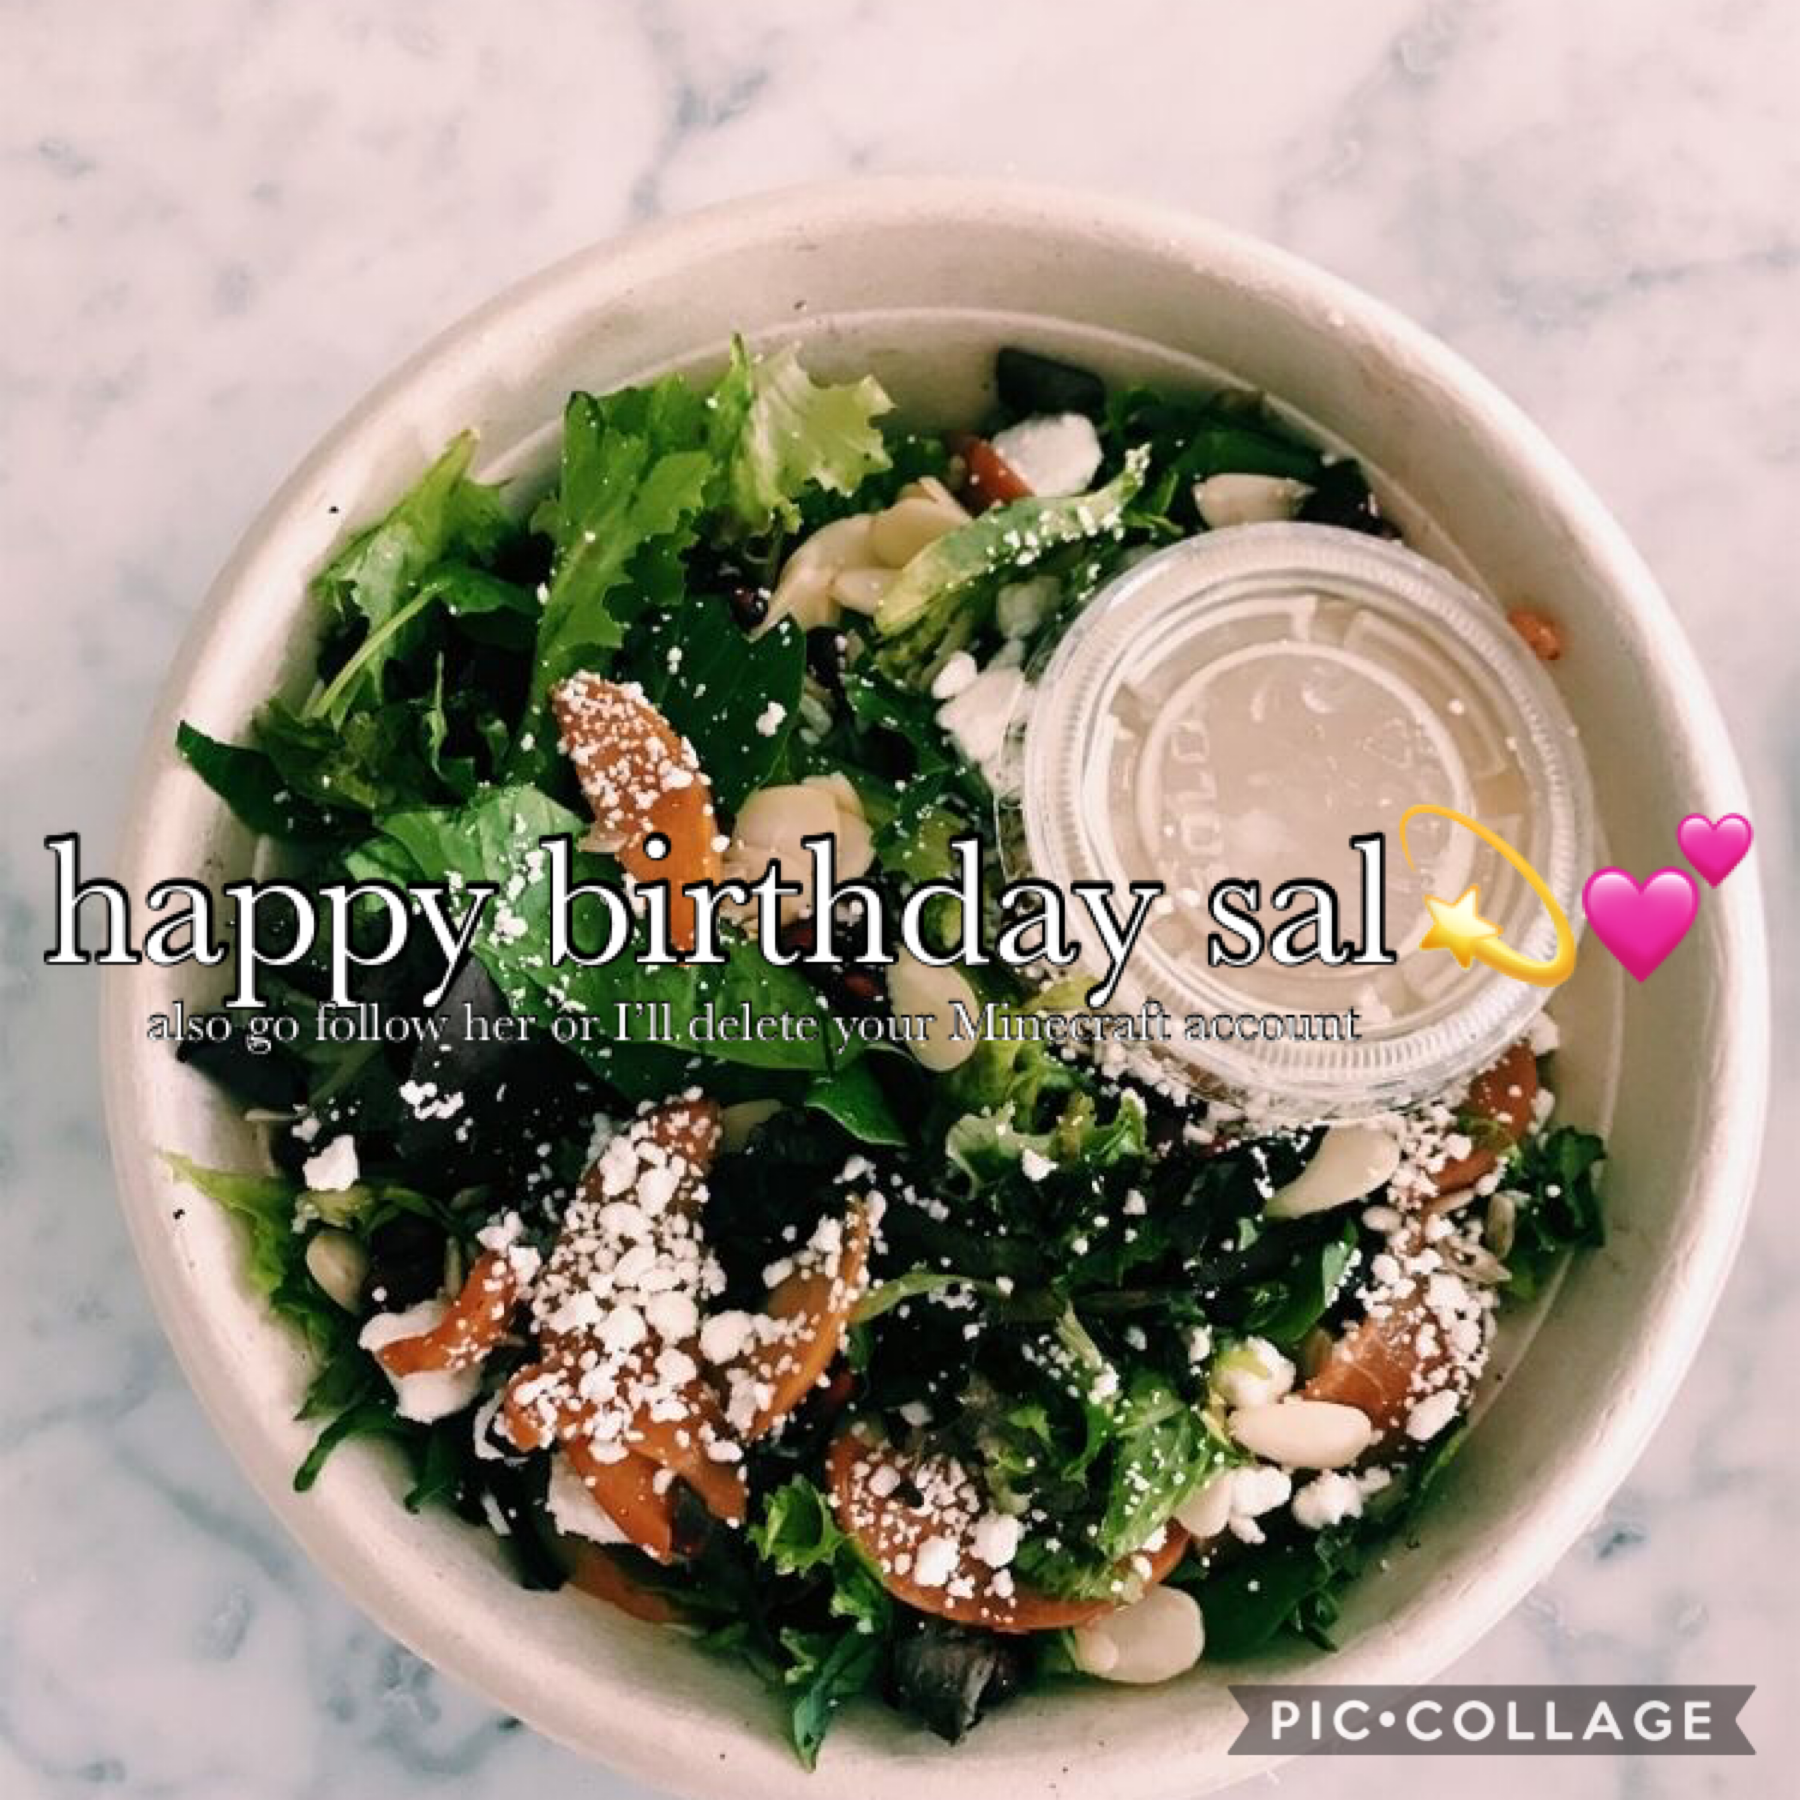 -t a p-

happy birthday to this absolute queen.
Ilysm Sal your one of my closet friends here and I hope you have an amazing day🥗🥗🥗💫